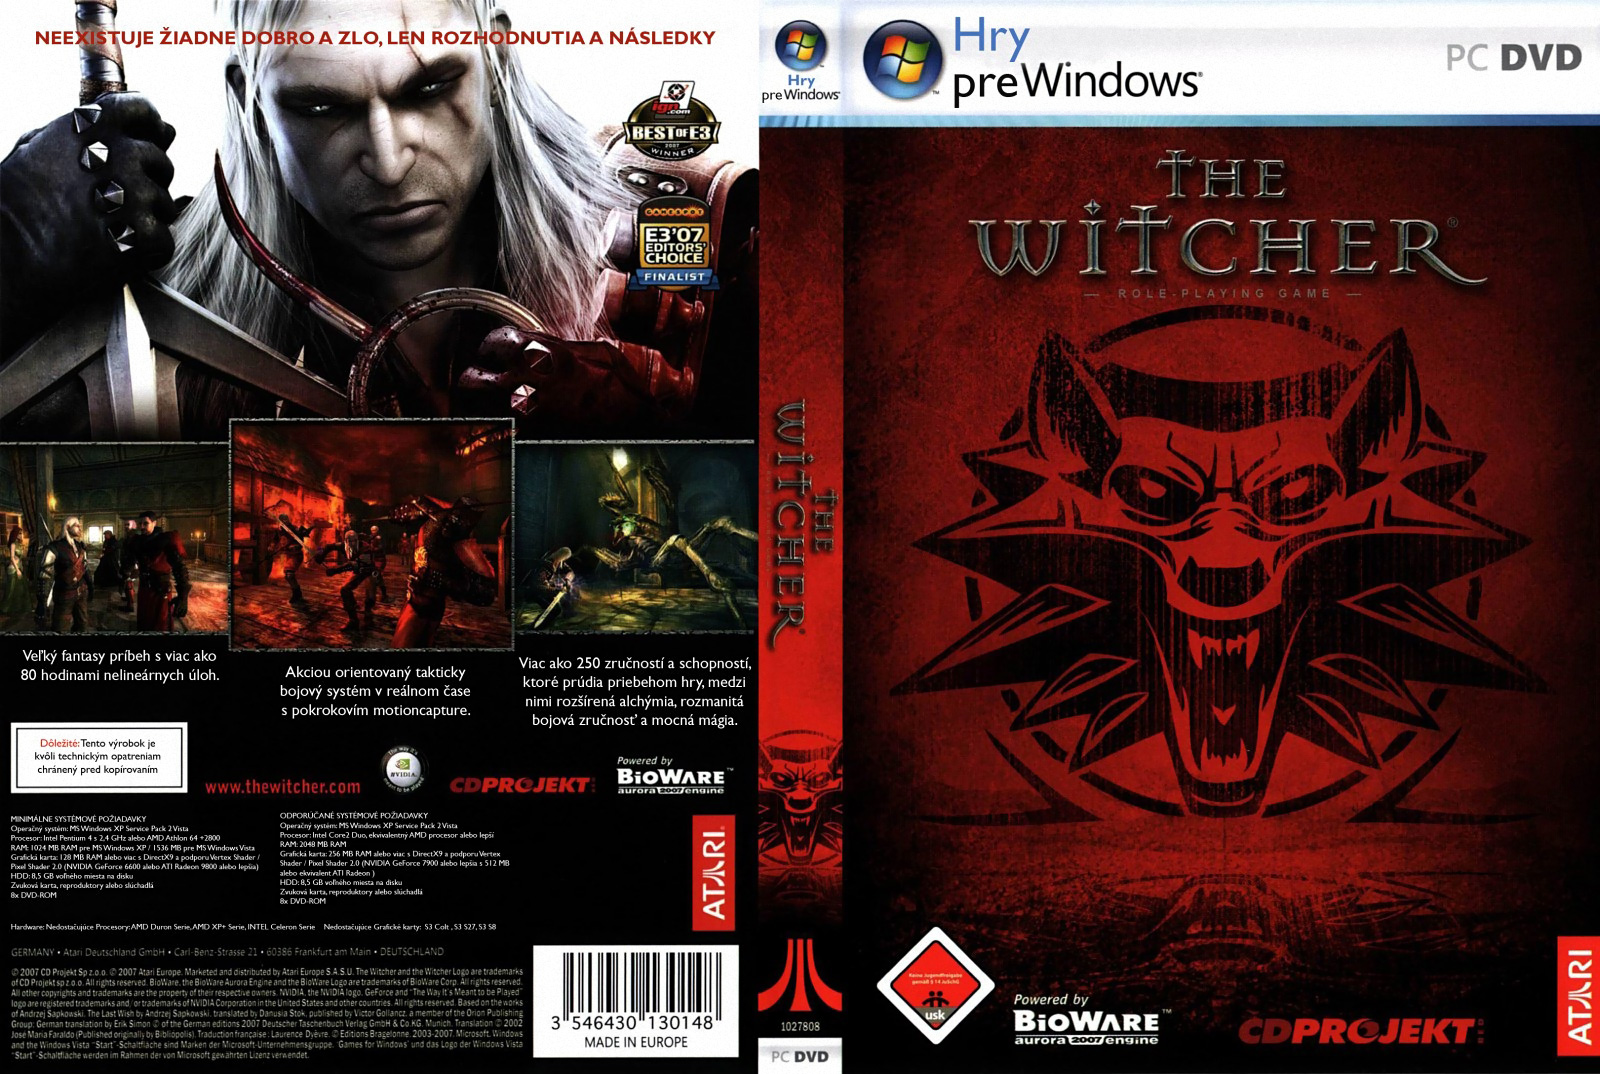 The Witcher - DVD obal 3